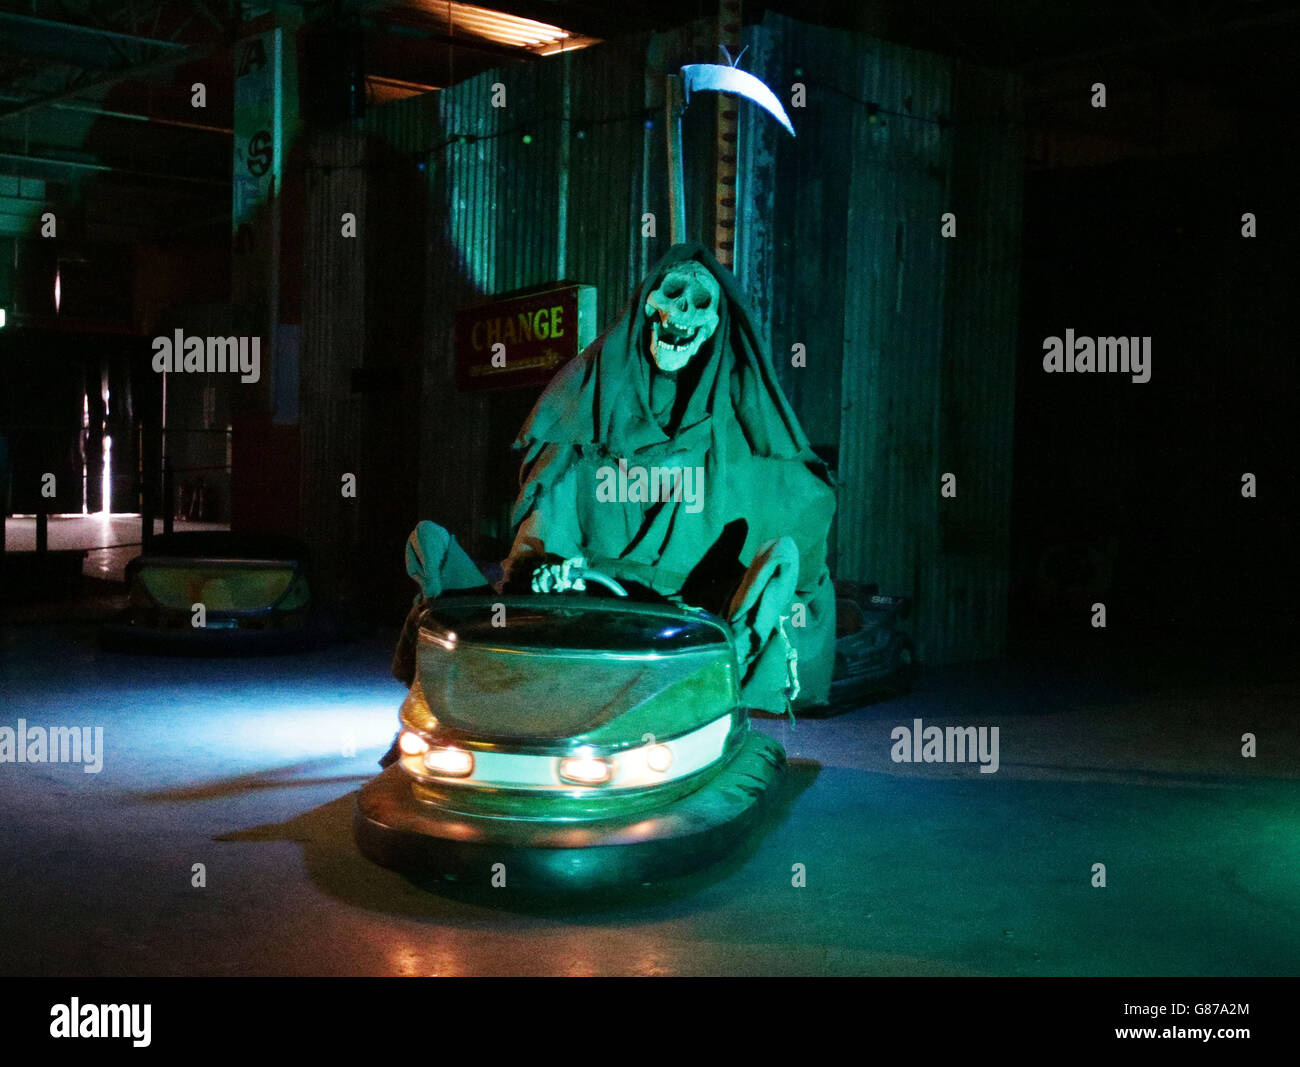 The grim reaper rides the dodgems at Dismaland - Bemusement Park, Banksy's biggest show to date, in Weston-super-Mare, Somerset. Stock Photo